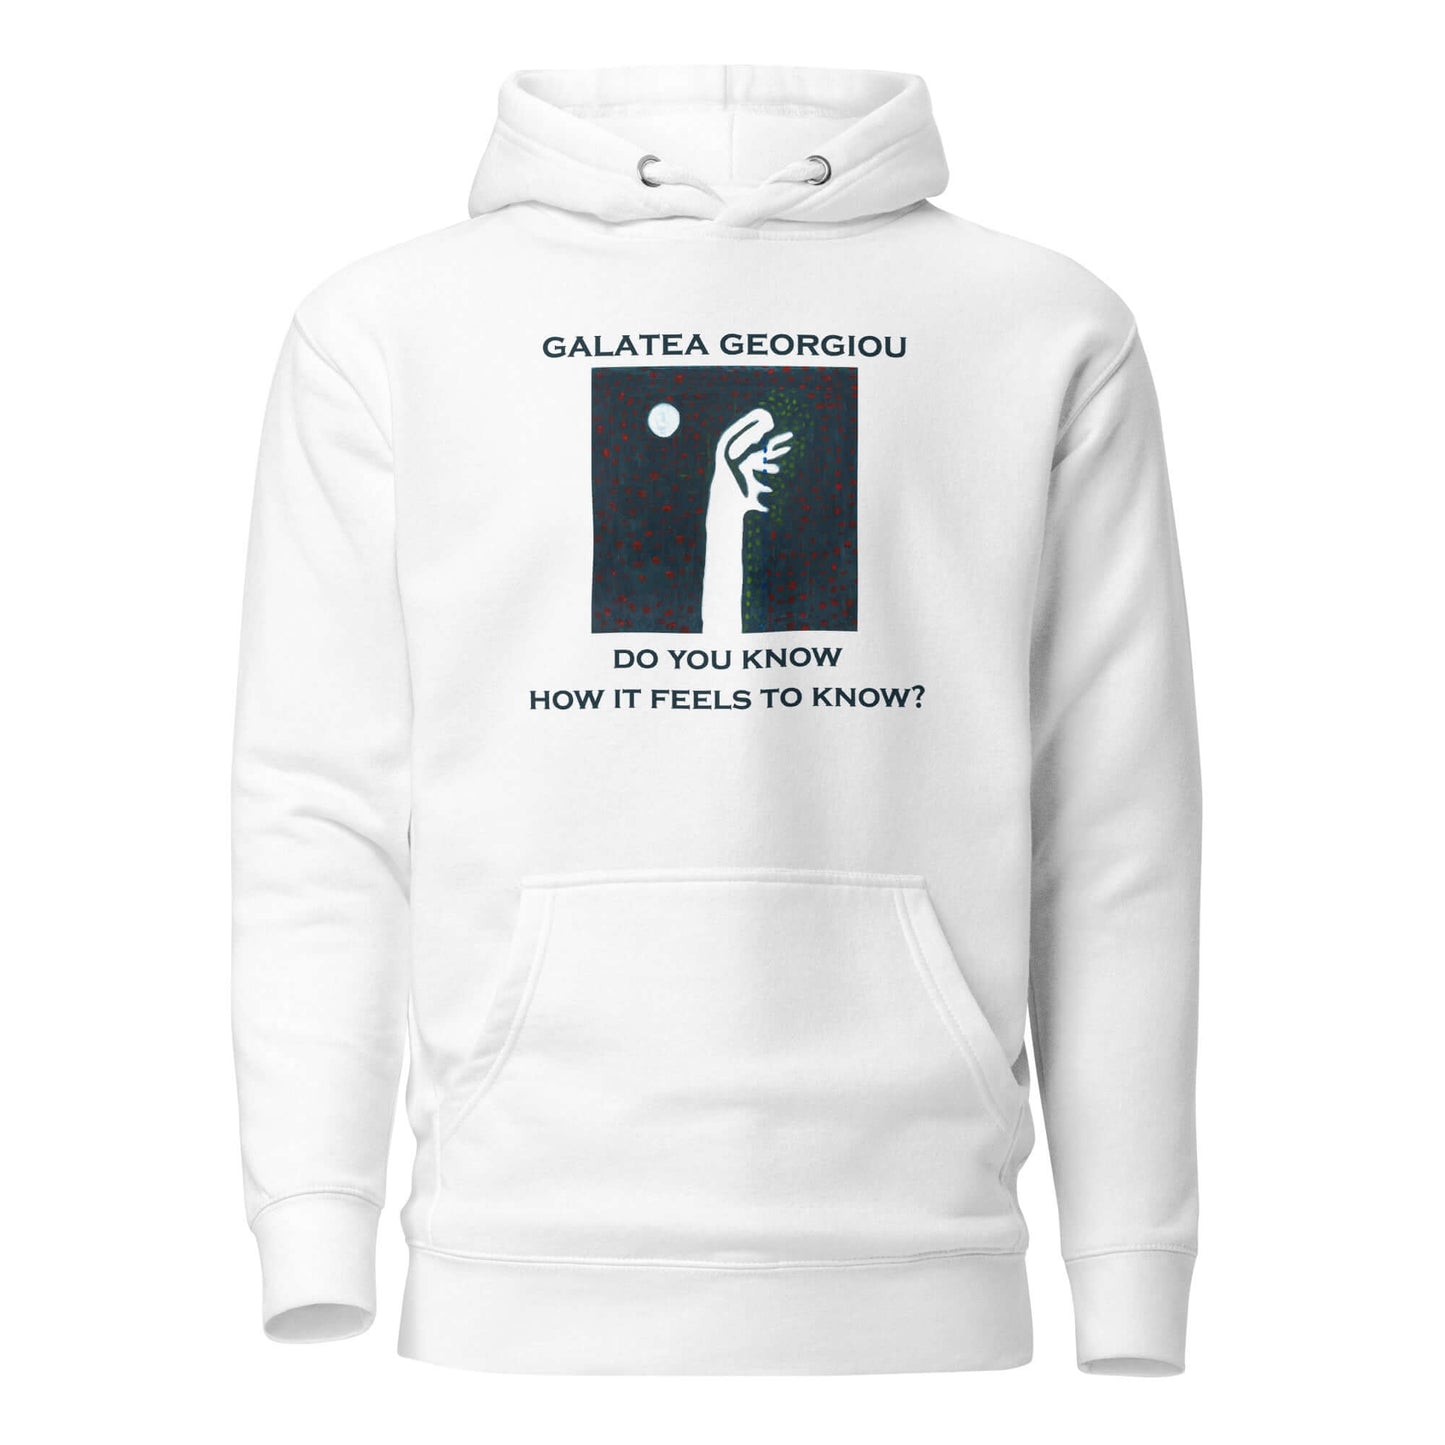 How it Feels to Know - Unisex Hoodie